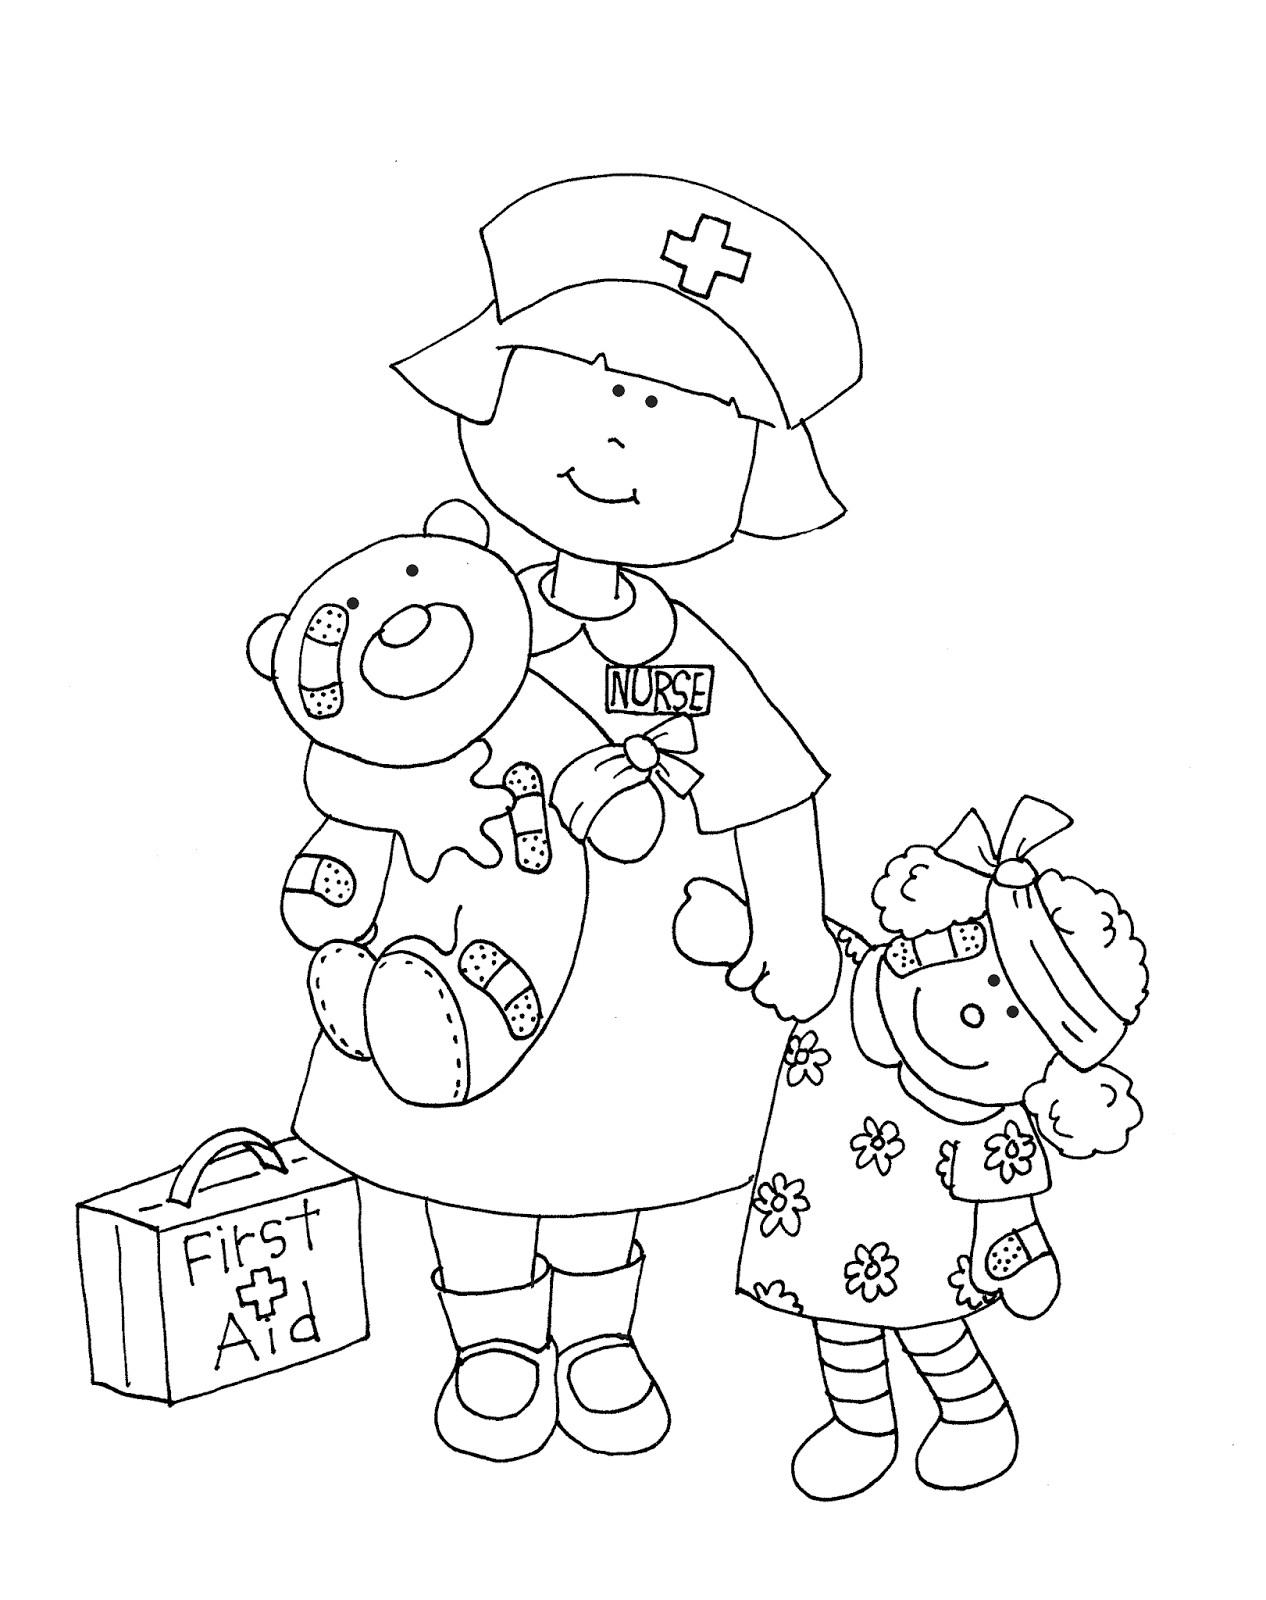 Nurse Coloring Pages For Preschool at GetColorings.com | Free printable ...